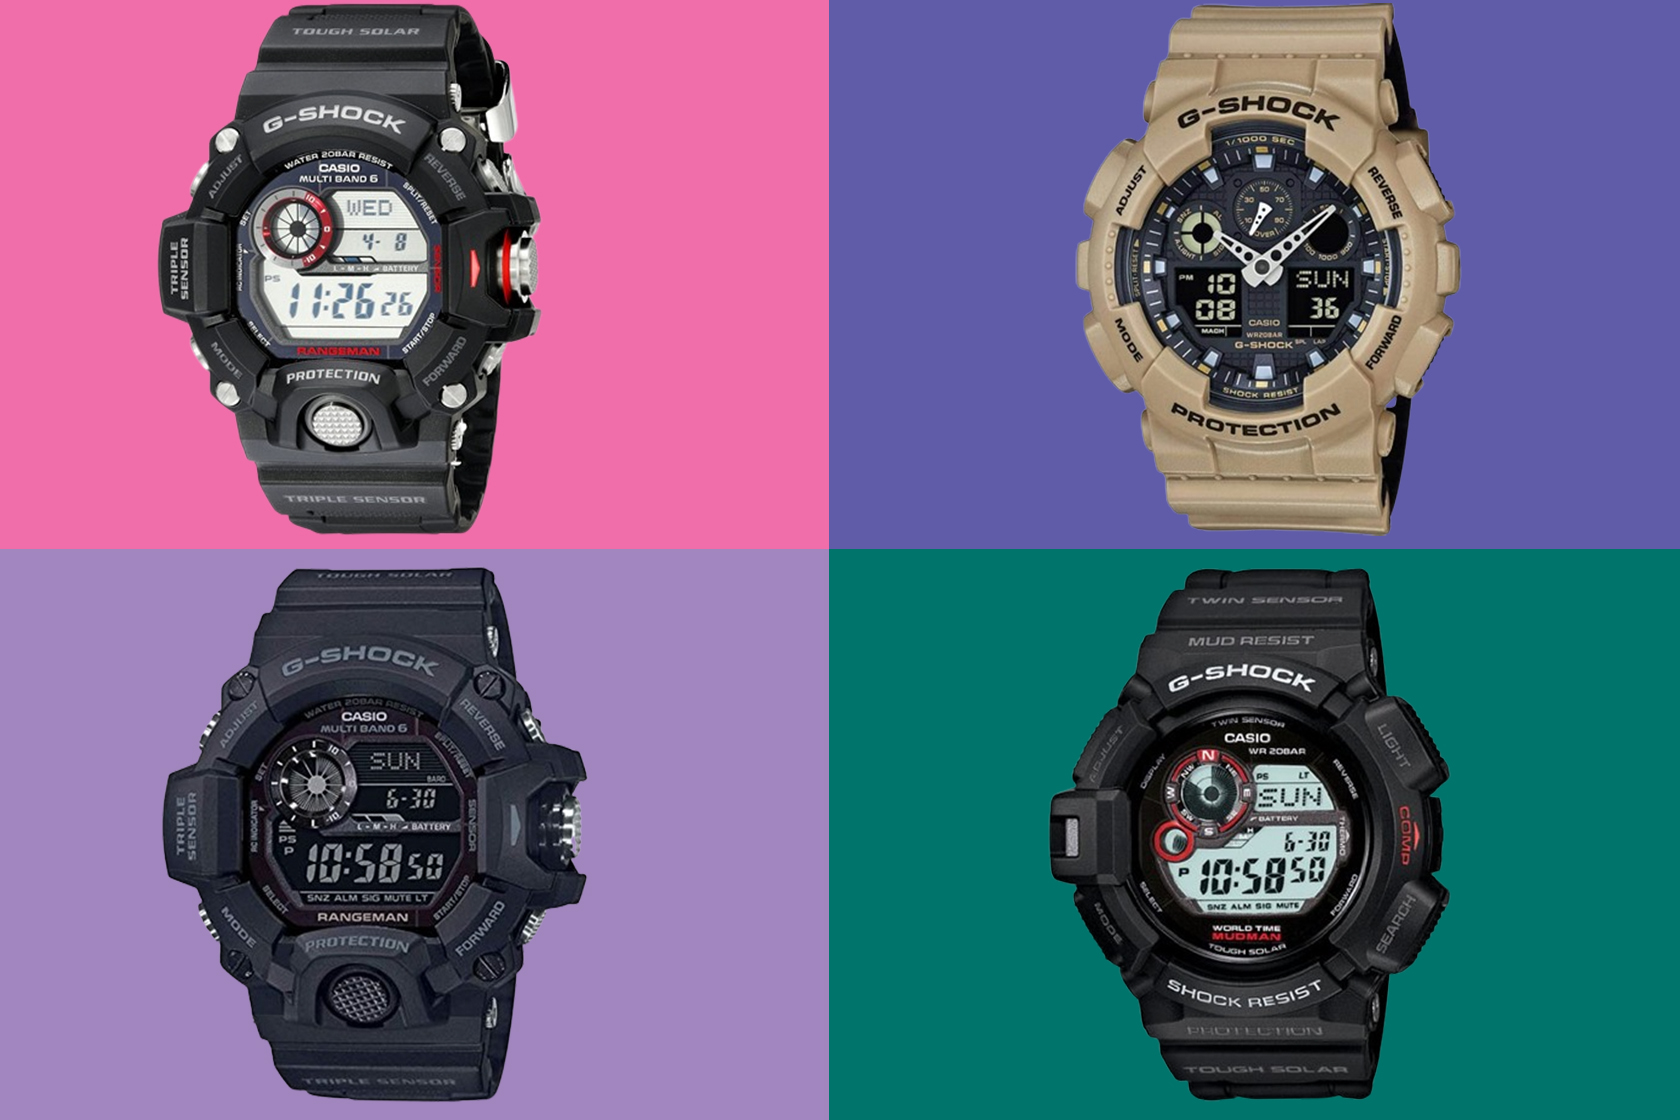 træfning Brobrygge Majroe Woot! is selling Casio G-Shock watches at shockingly low prices